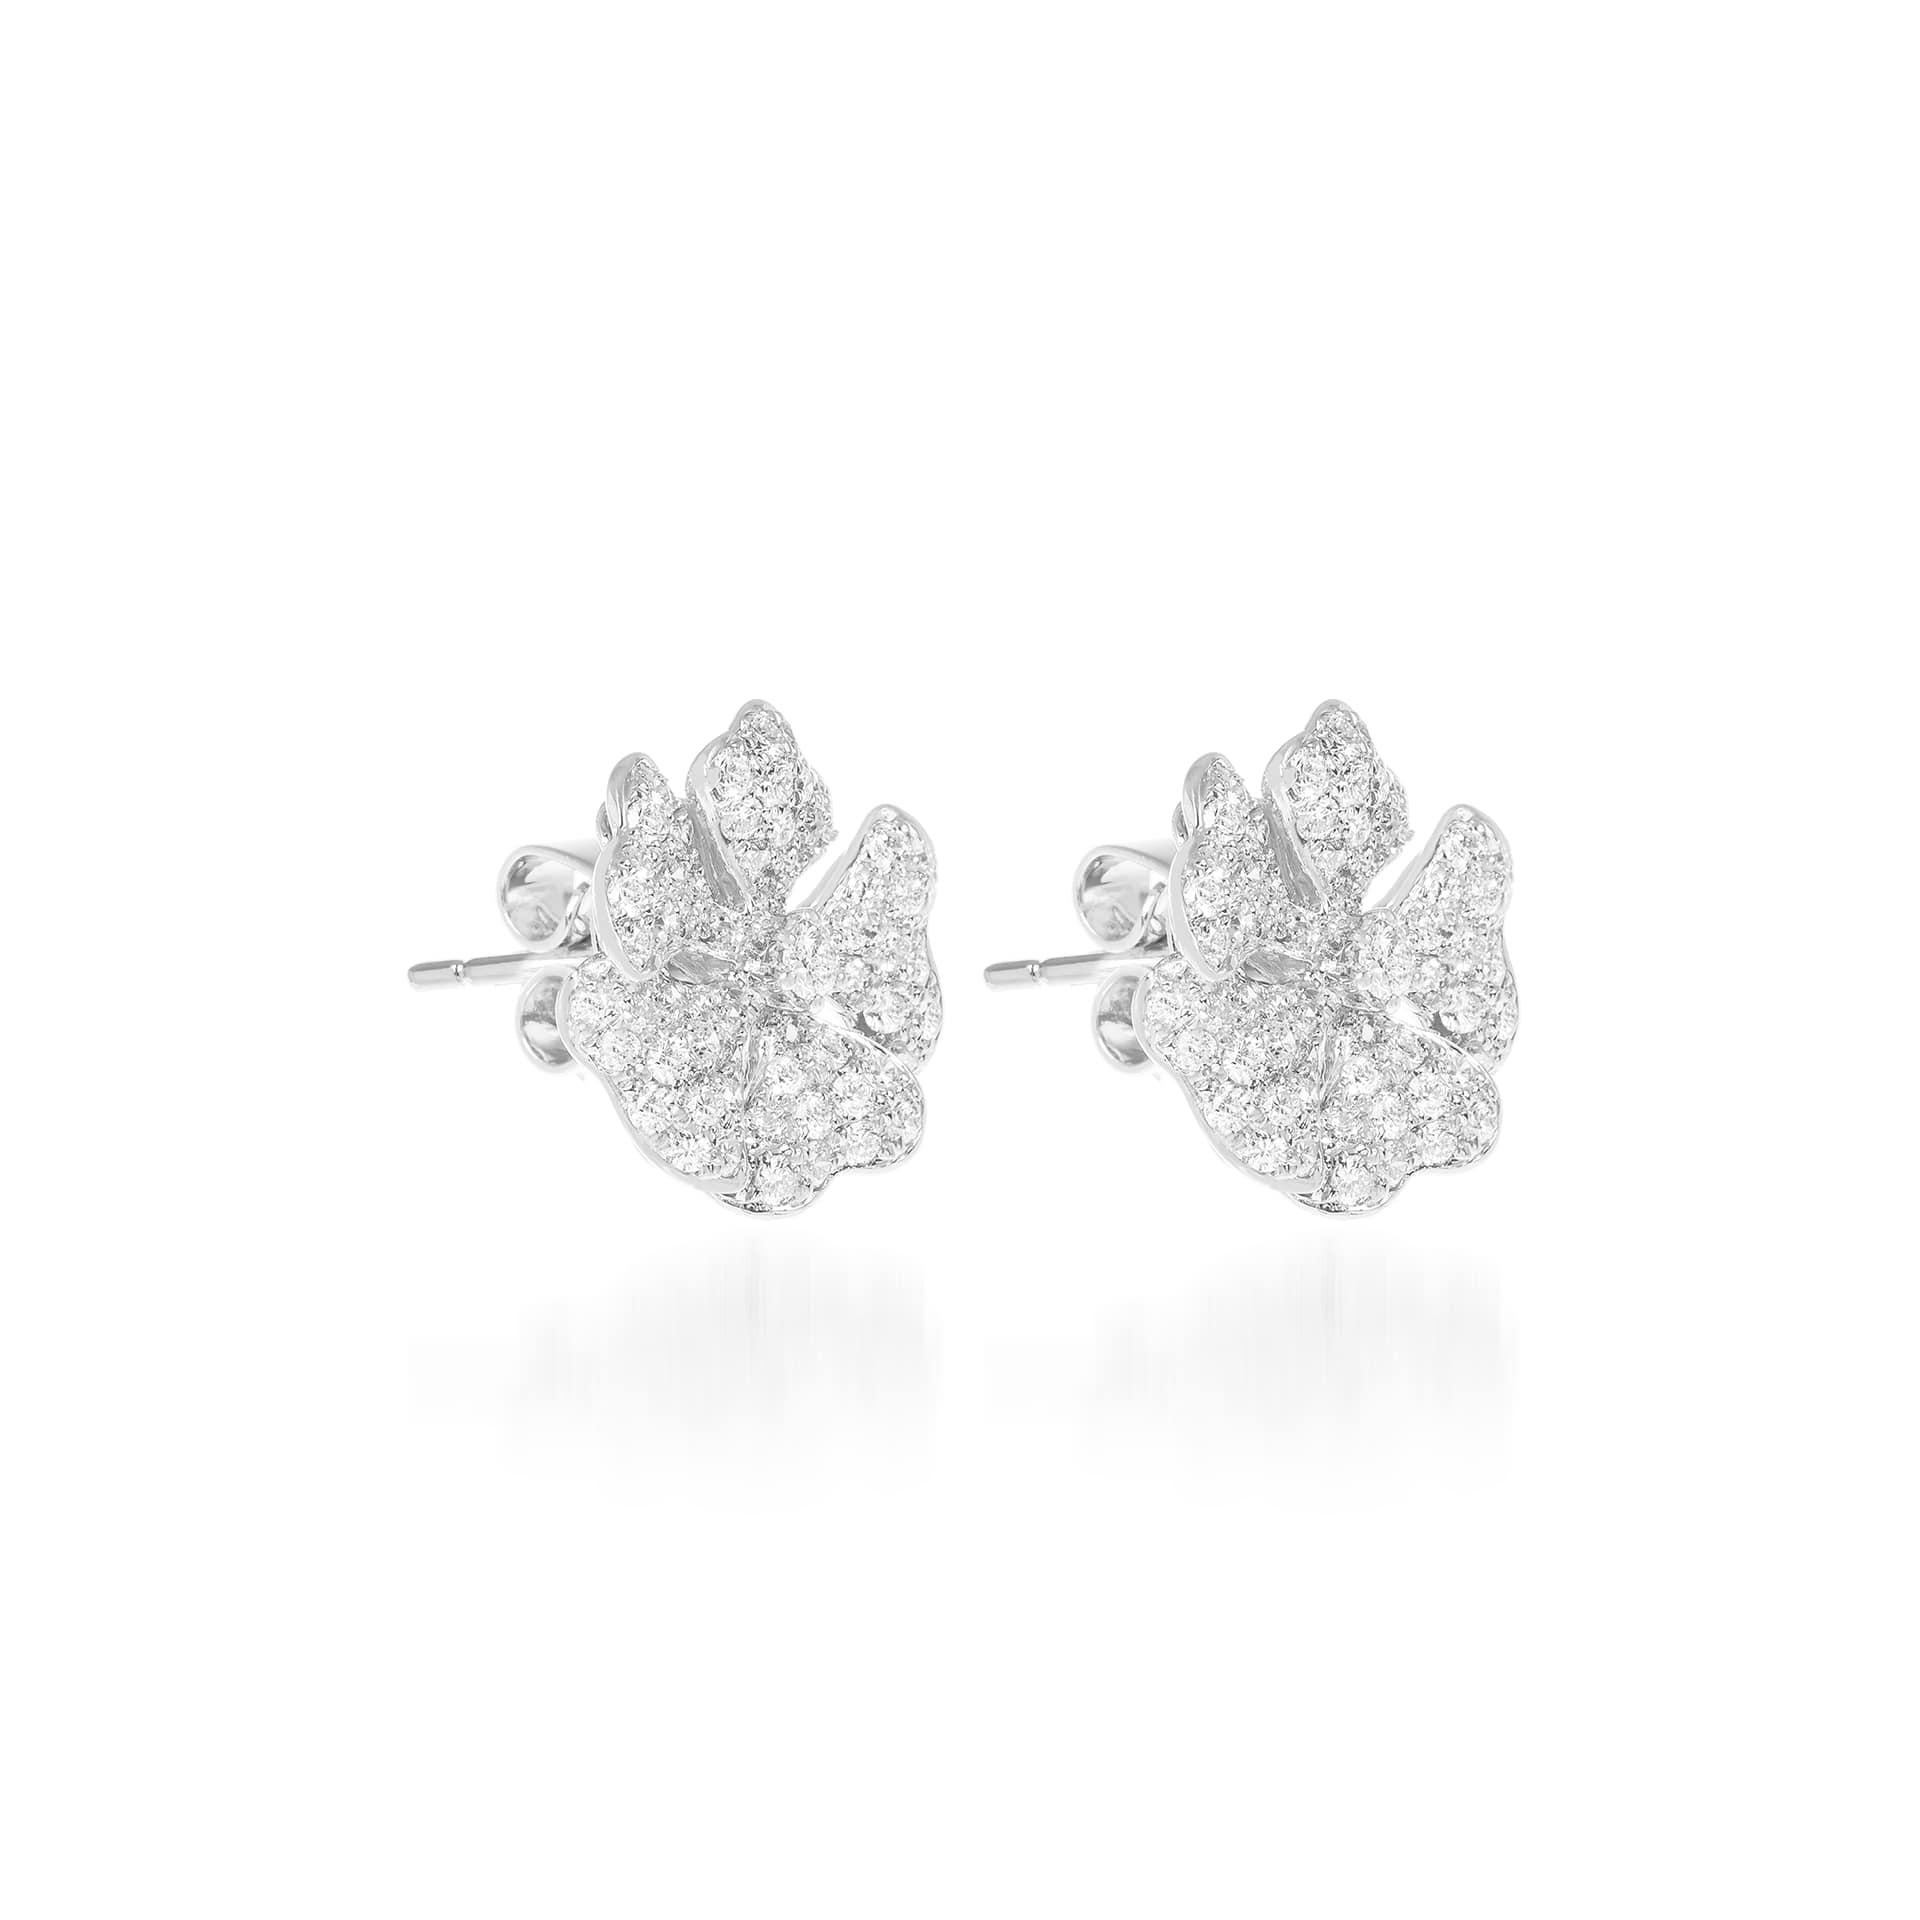 Bloom Gold and Pavé Diamond Small Stud Earrings in 18K White Gold

Inspired by the exquisite petals of the alpine cinquefoil flower, the Bloom collection combines the richness of diamonds and precious metals with the light versatility of this